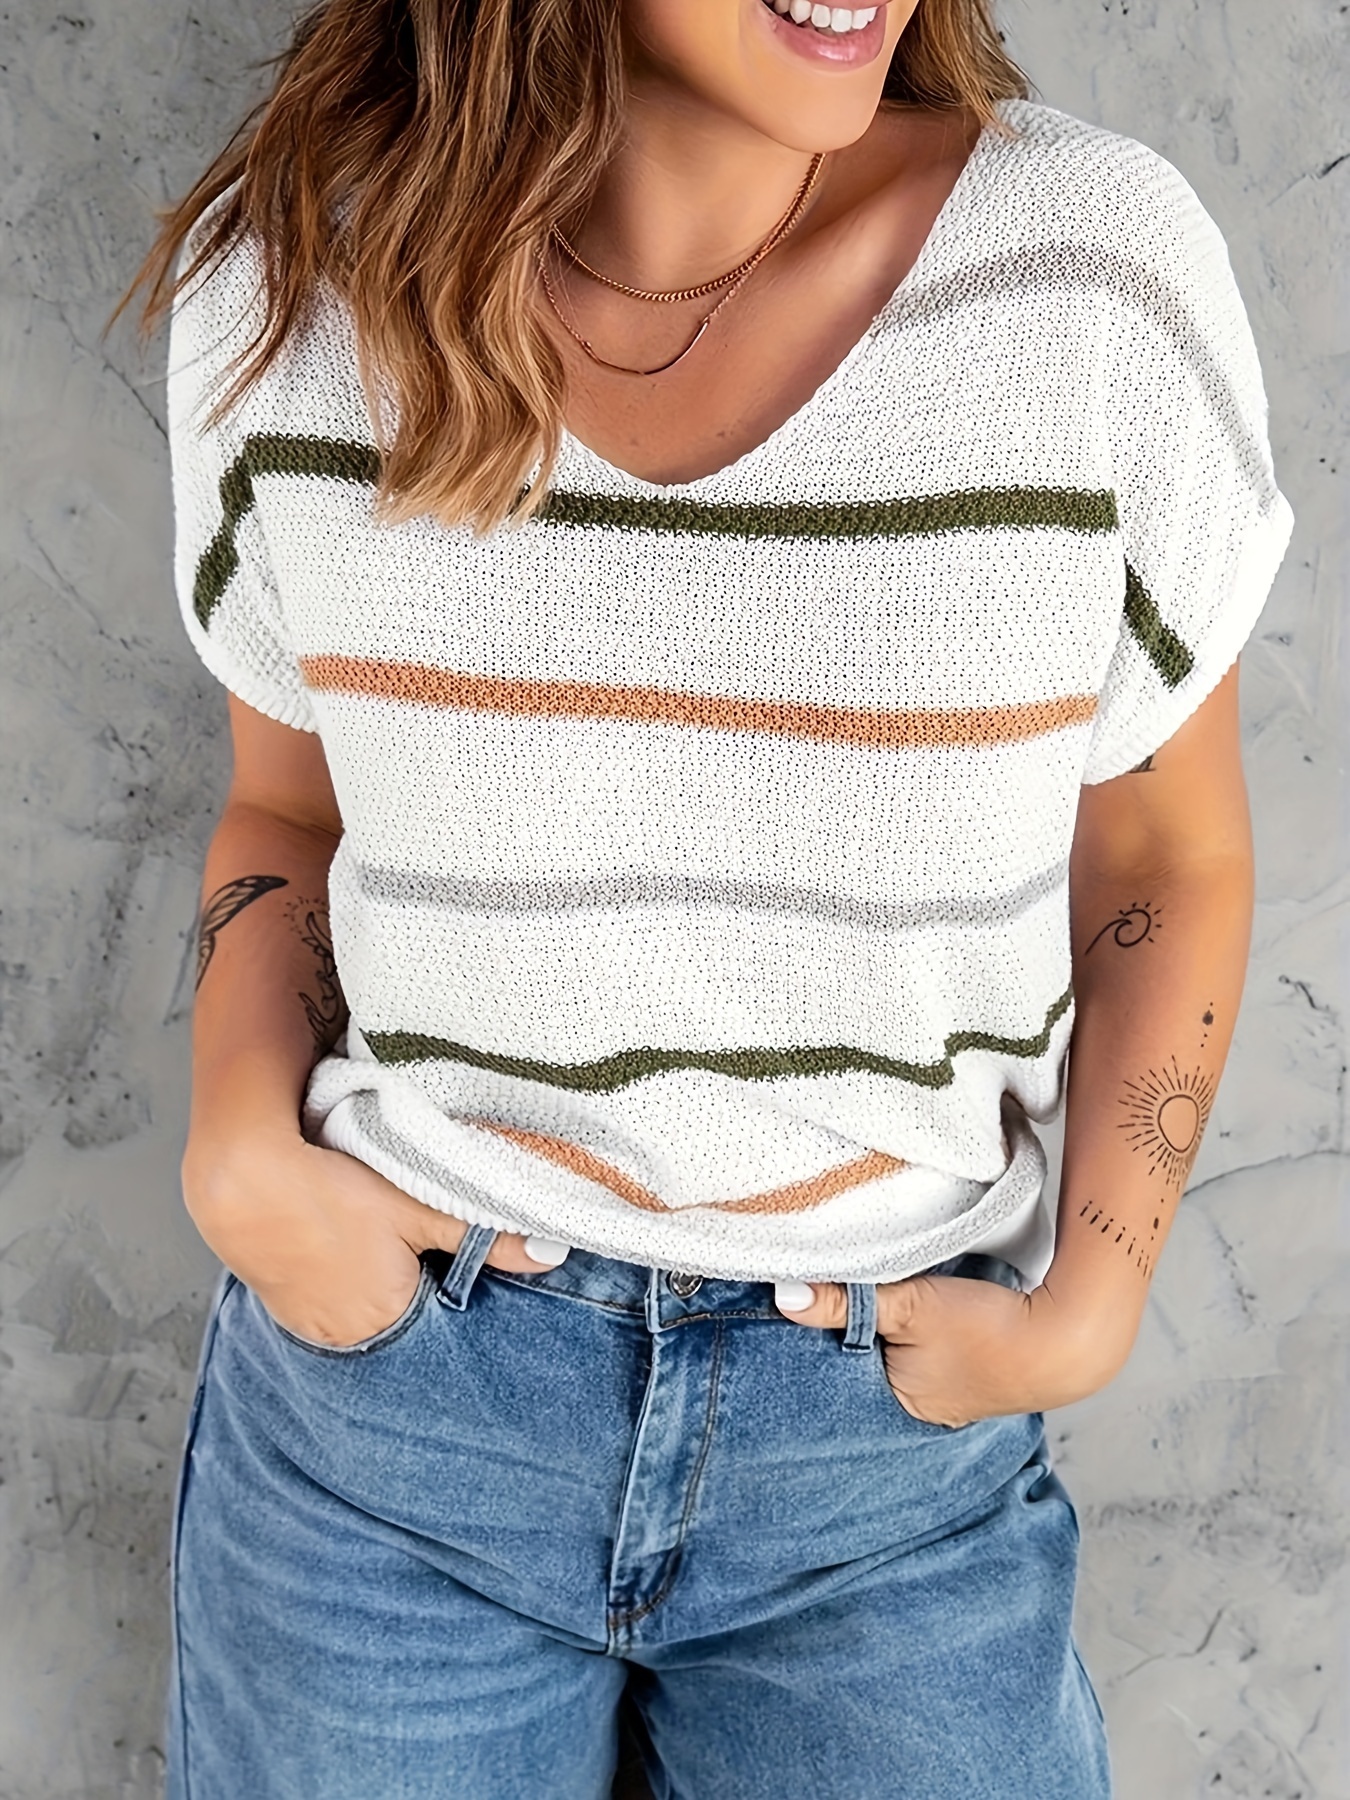 Women's Striped Tops, Explore our New Arrivals